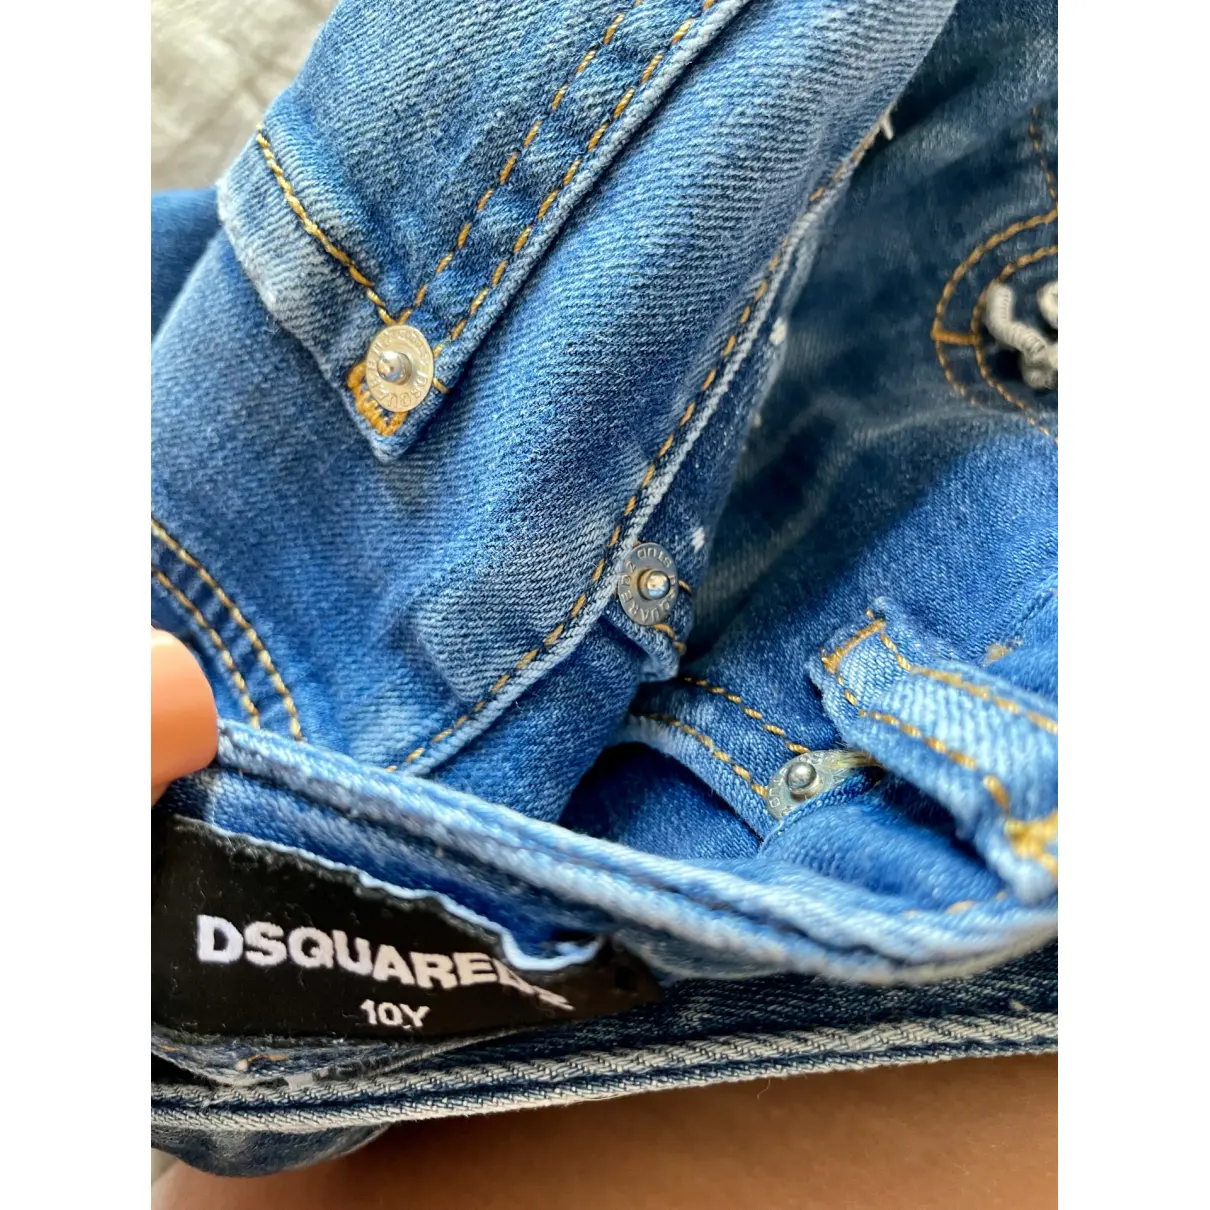 Buy Dsquared2 Shorts online